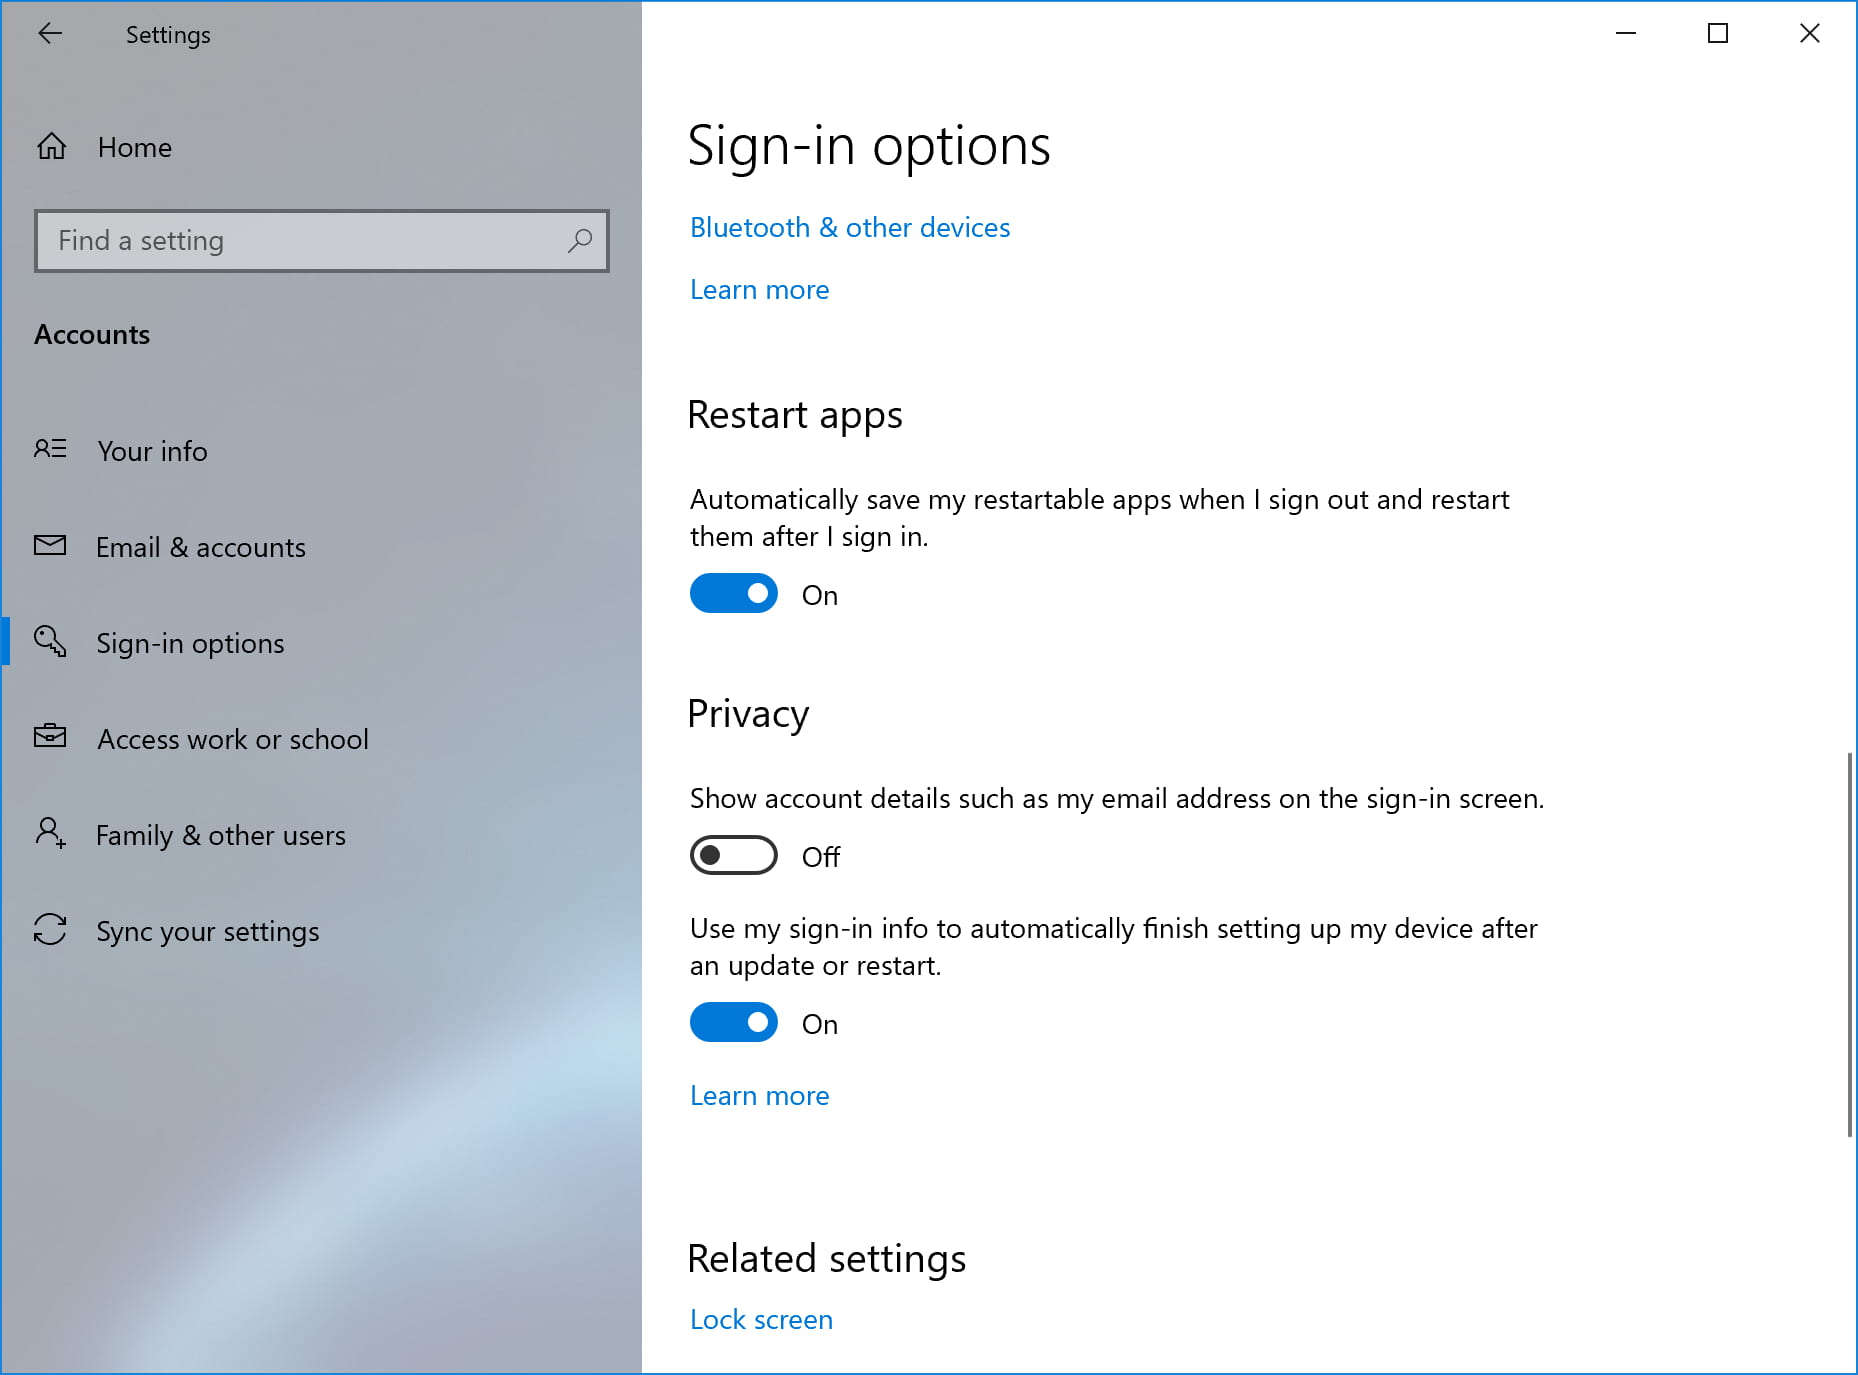 Disable Restarting Apps At Sign-In - Windows 10 May 2020 Update (20H1)